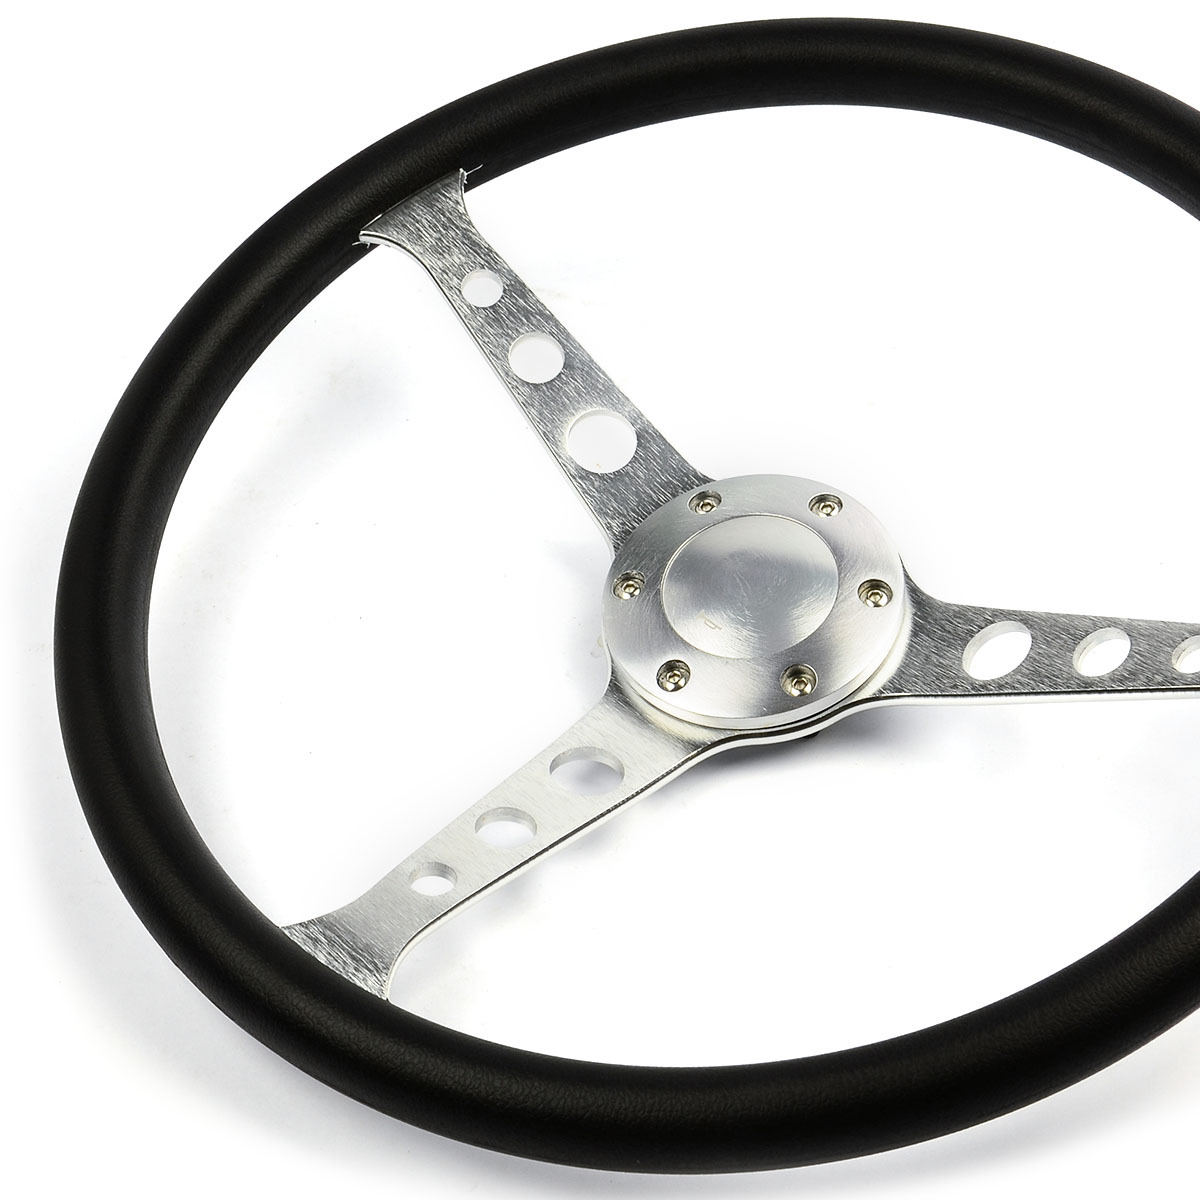 Steering Wheel Poly 15" ADR Classic Brushed Alloy With Holes